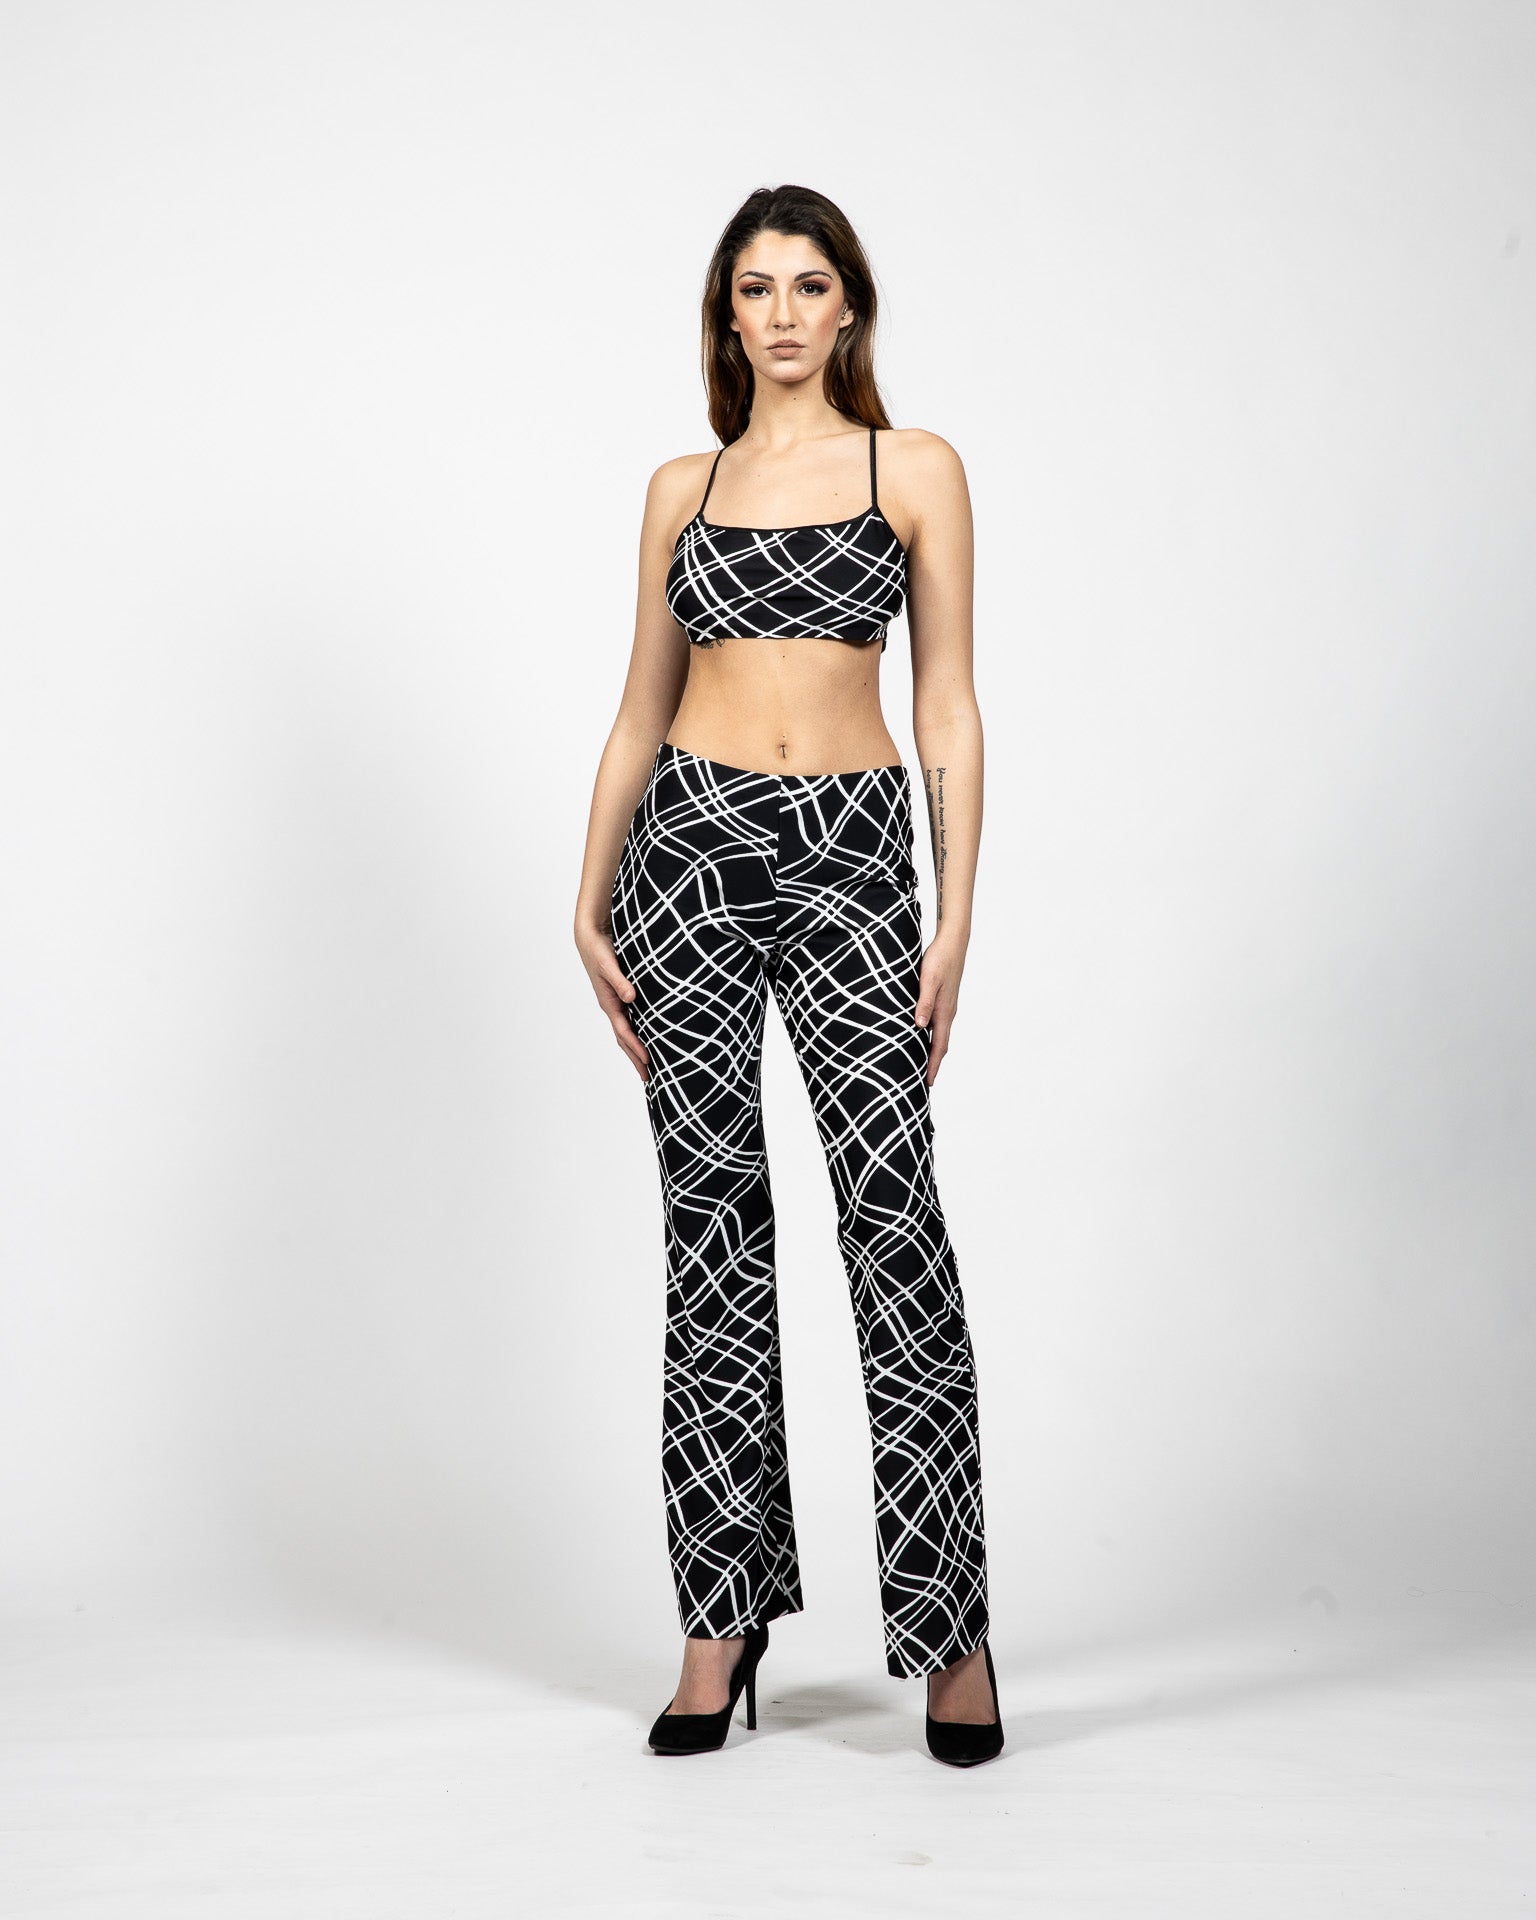 Printed Cropped Bra Top, Shorts And Pants With Waist Bands - Front View - Samuel Vartan